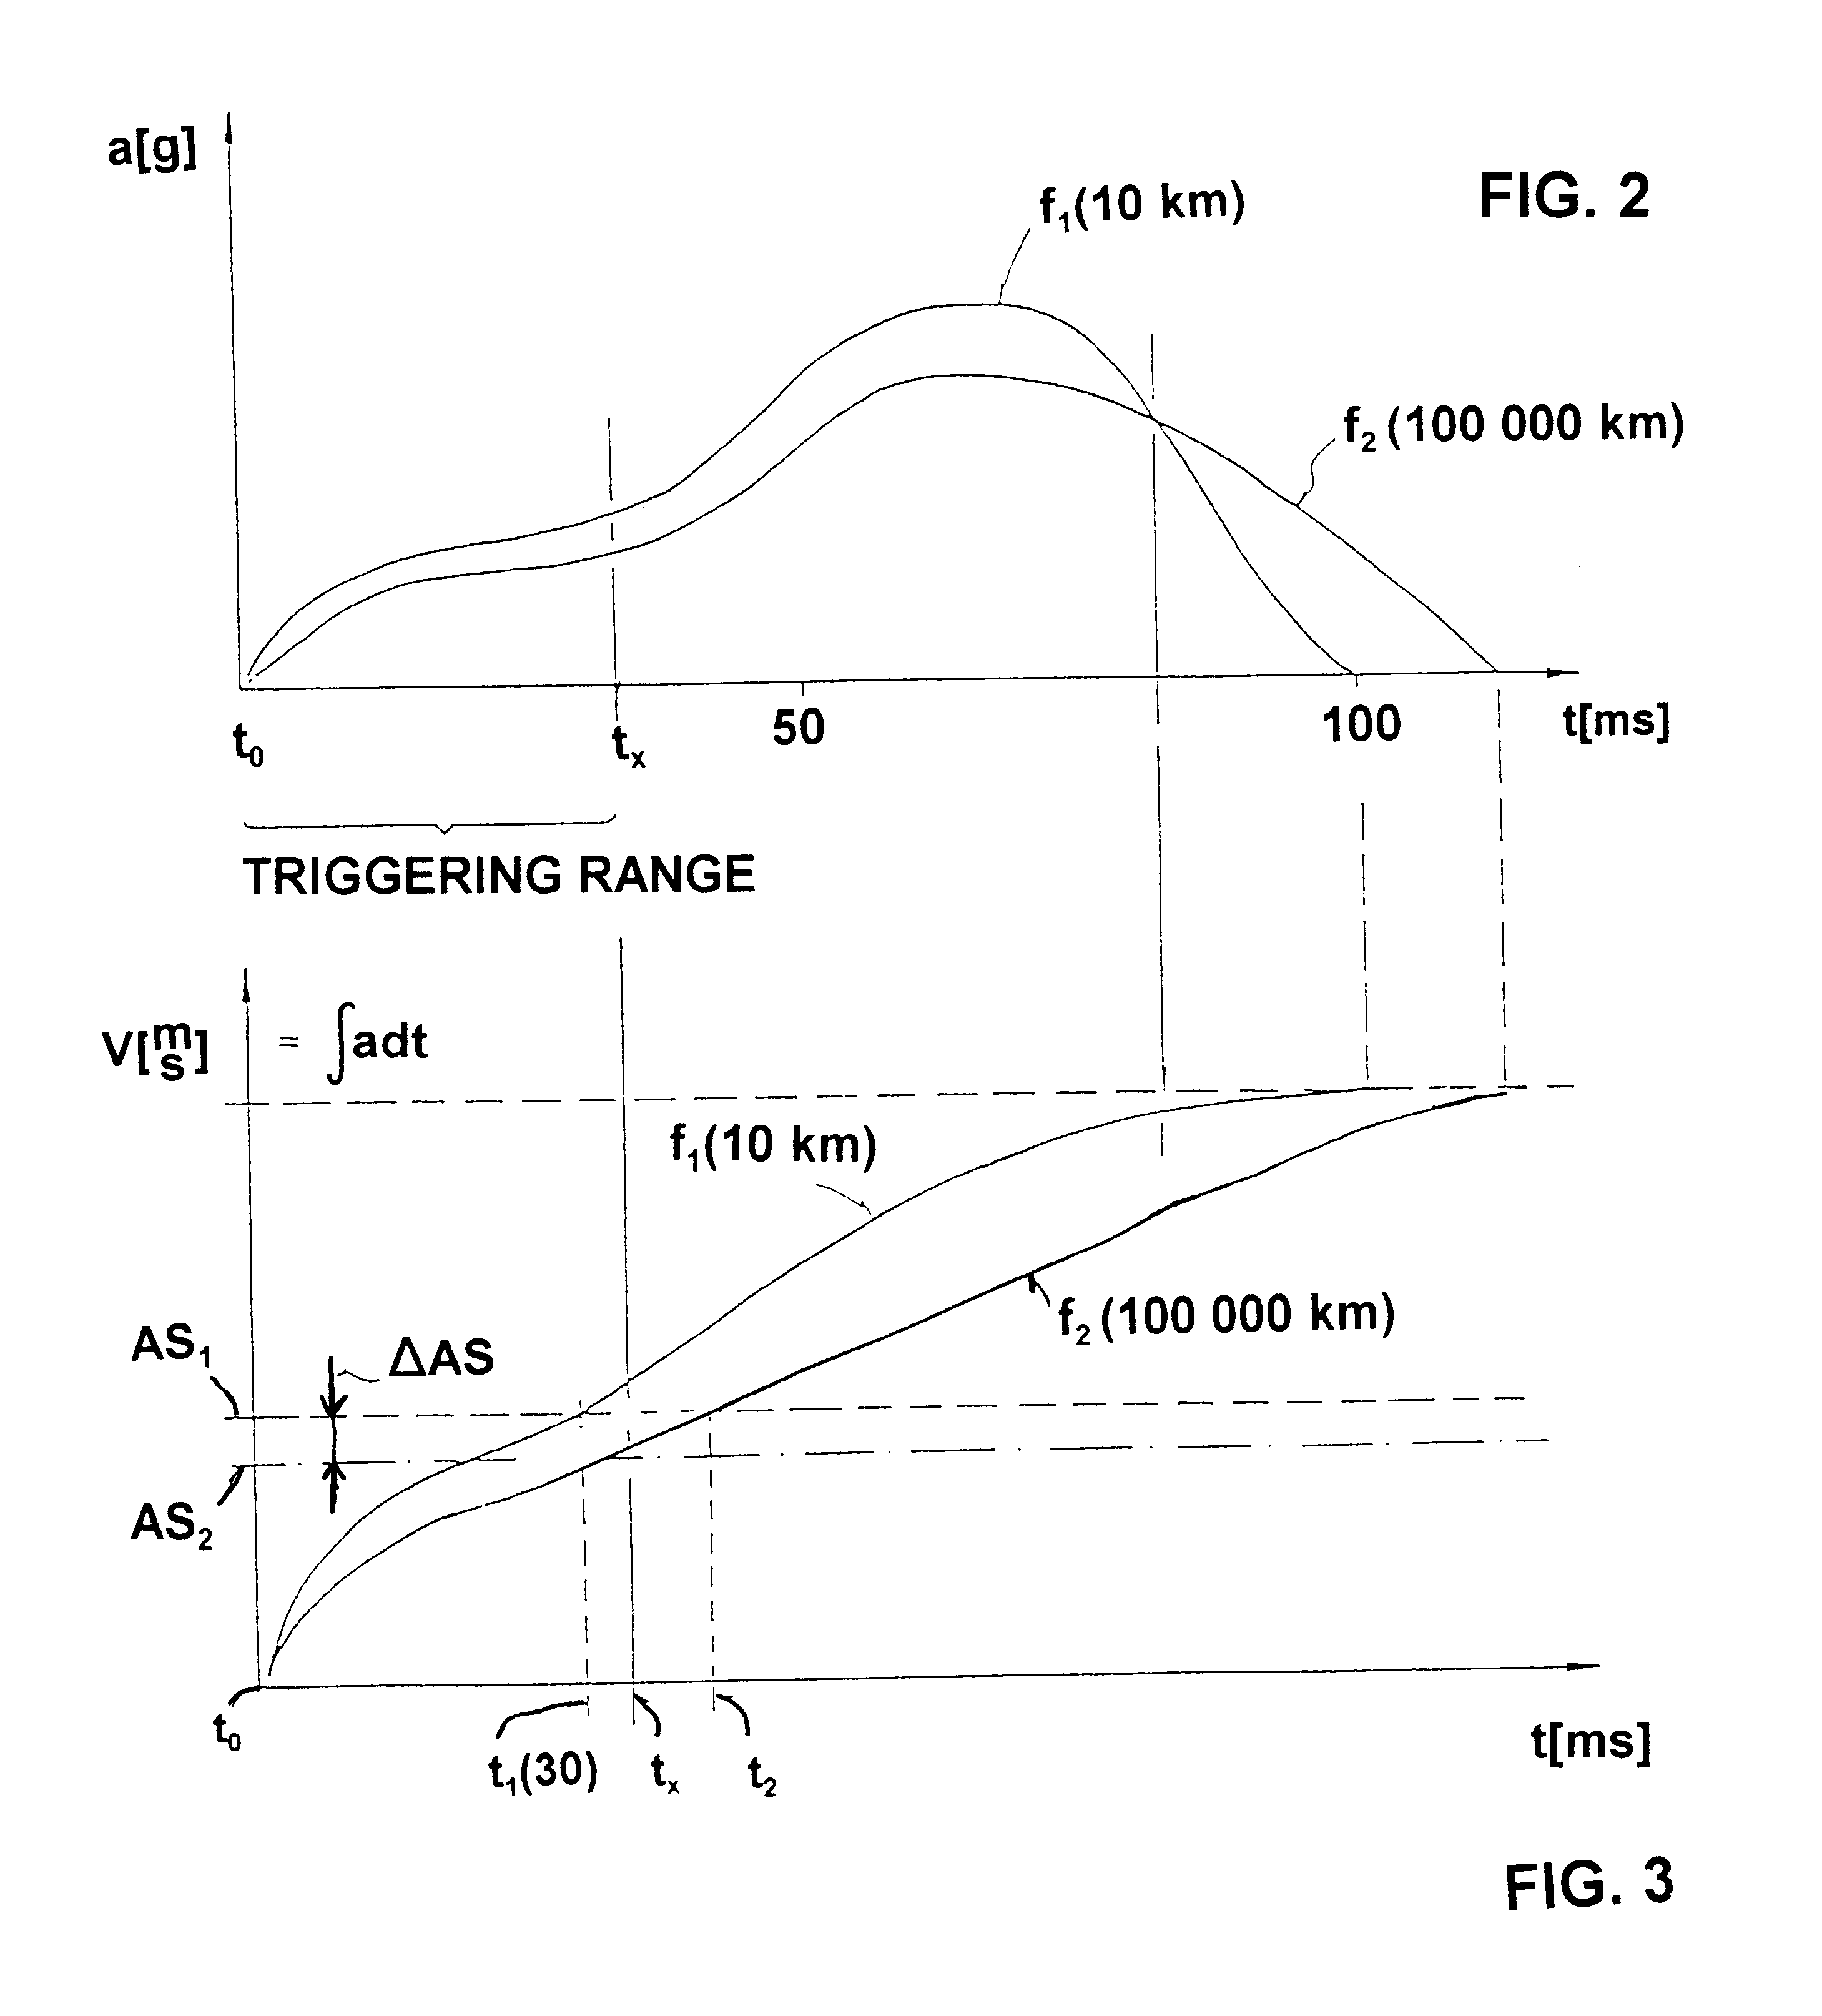 Method of updating the trigger threshold of a passive safety system